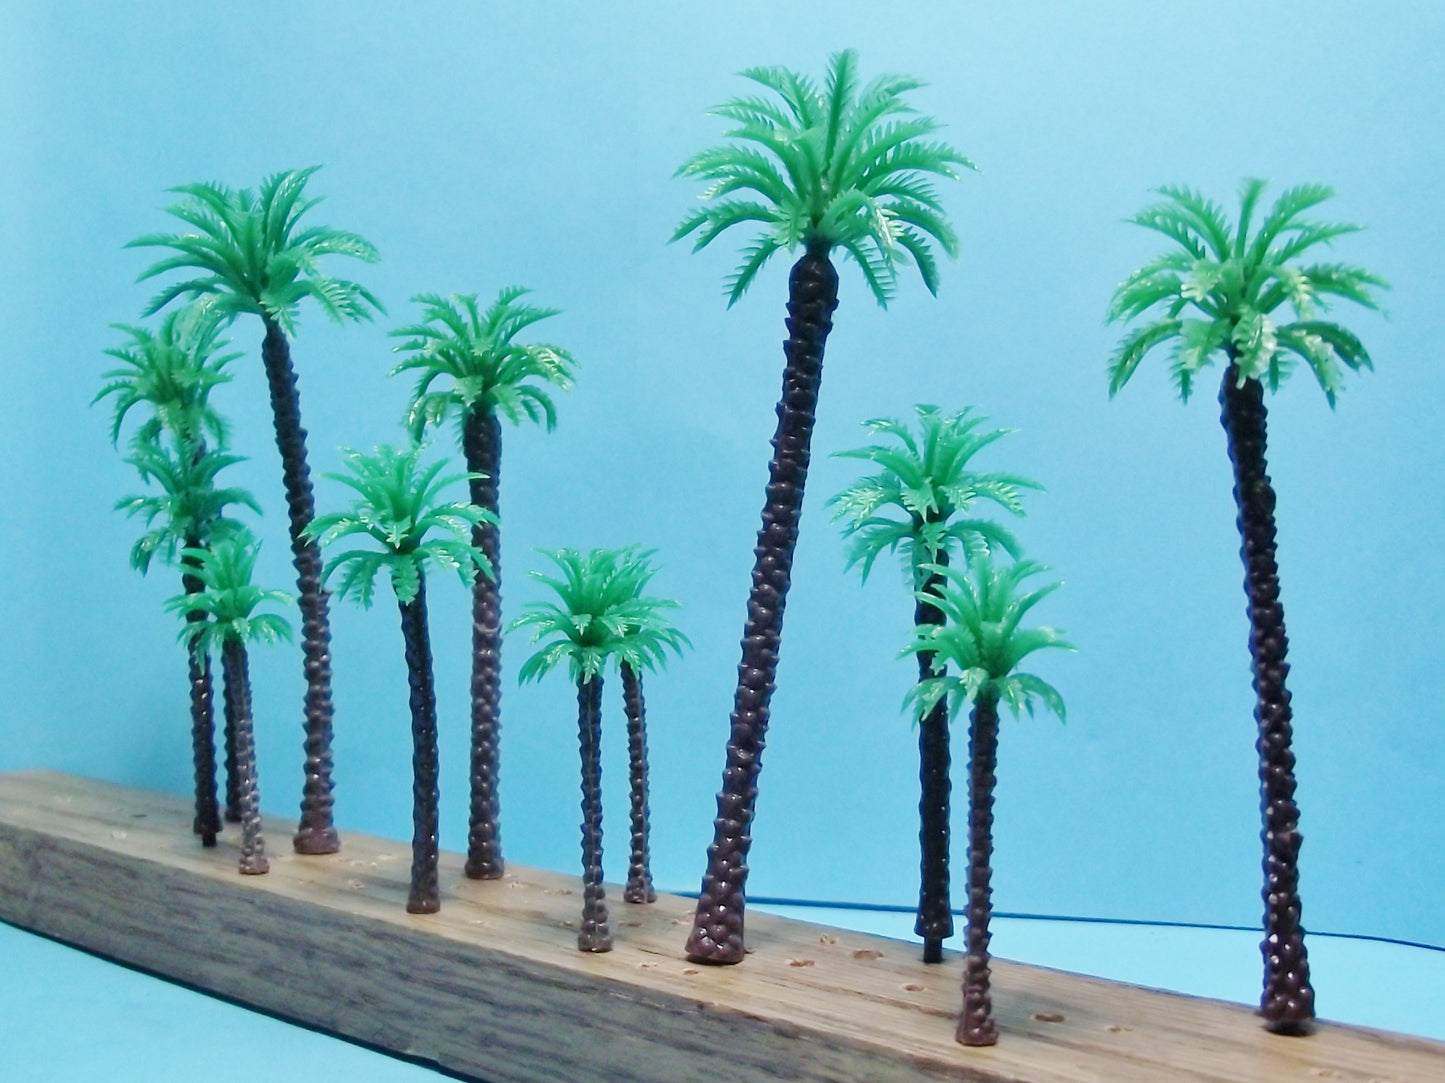 Model Coconut Palm Trees for Multi Scale Use 12 Piece Assortment in 4 Sizes